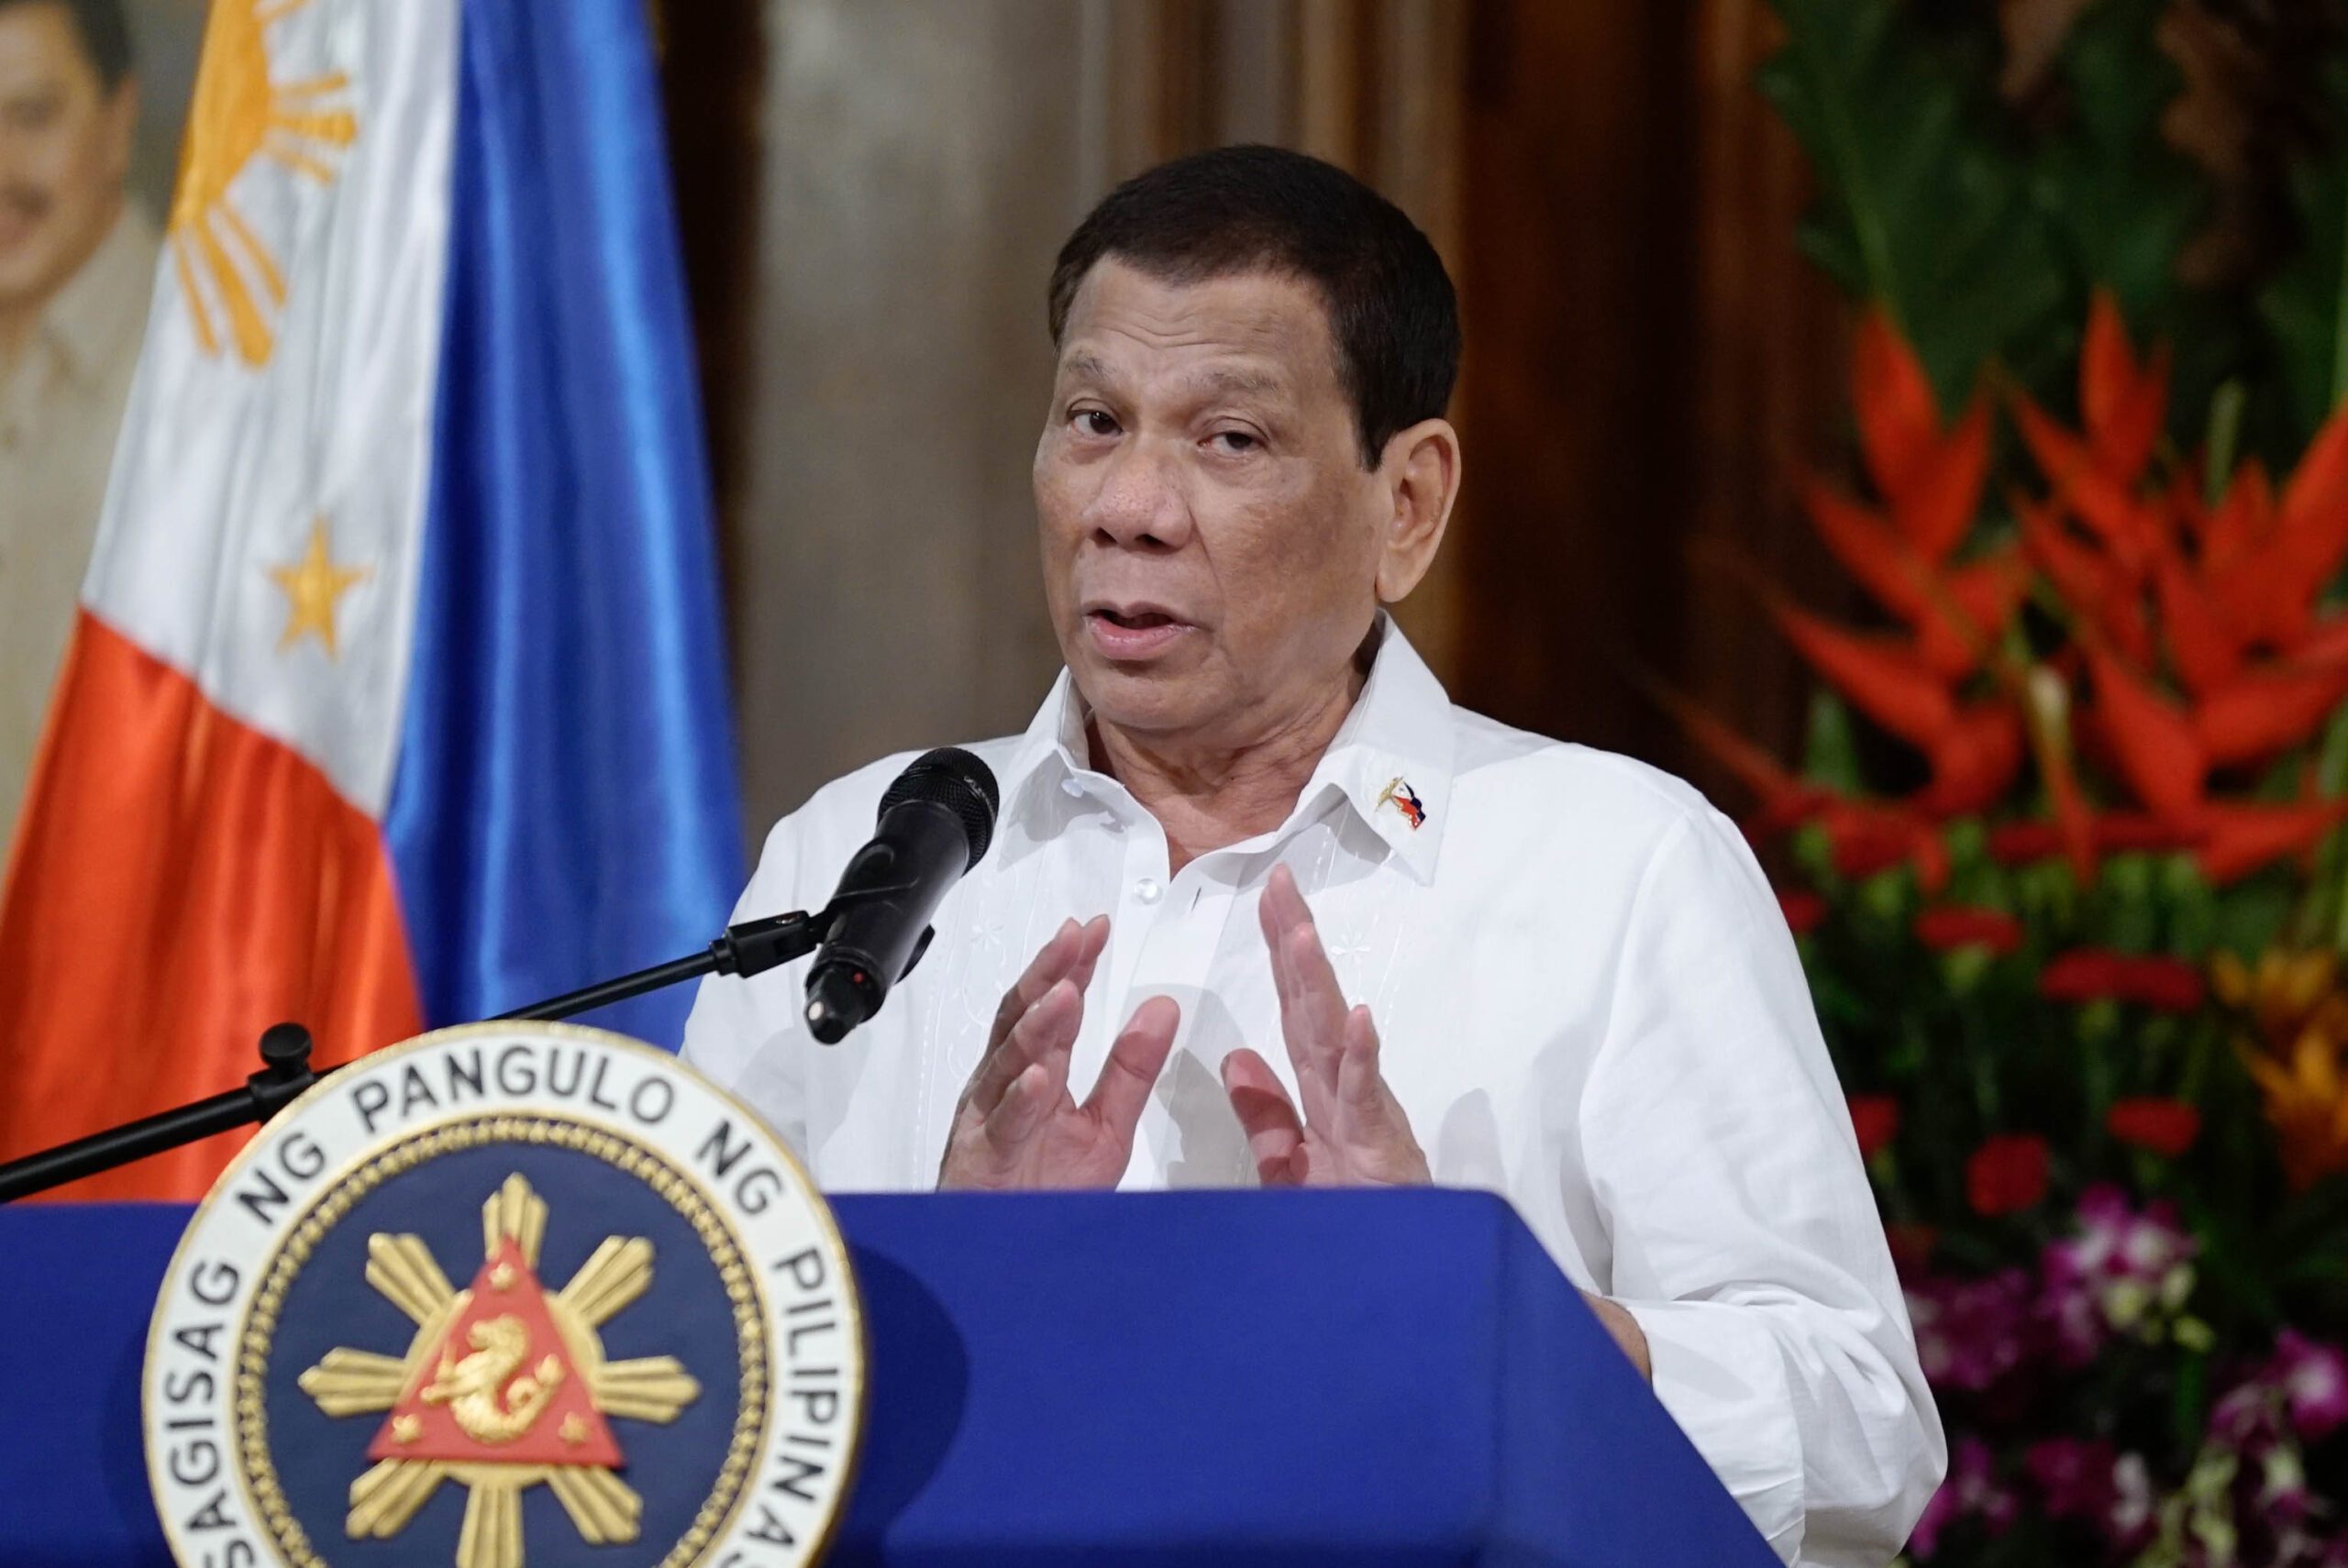 Duterte insists he will raise Hague ruling: ‘Don’t control my mouth’